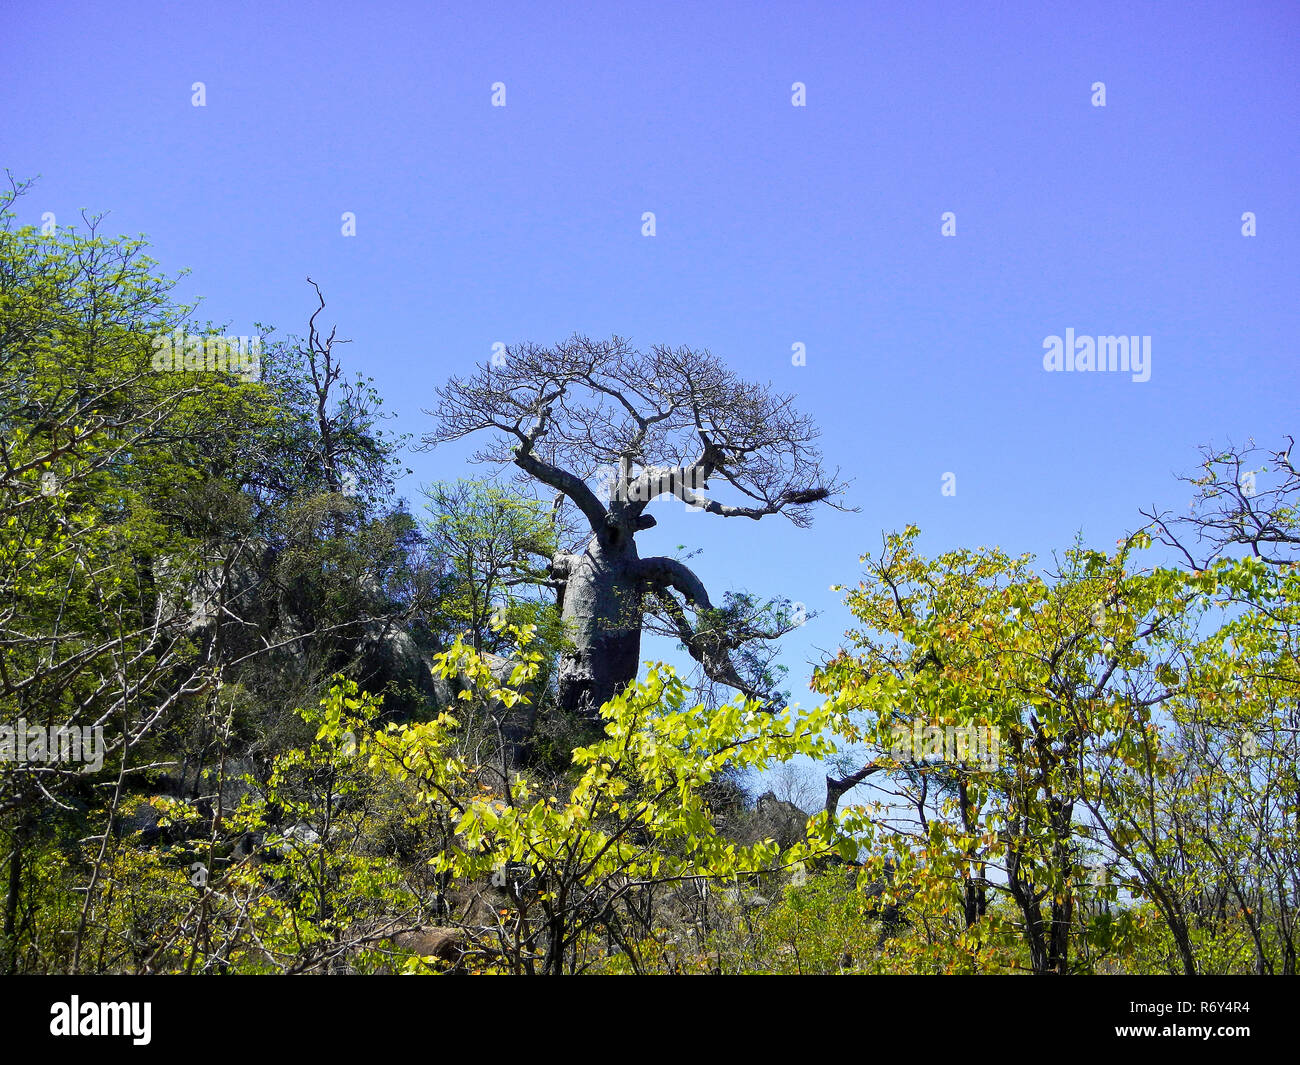 baobab tree in dry vegetation and blue background, Kruger Park, South Africa Stock Photo